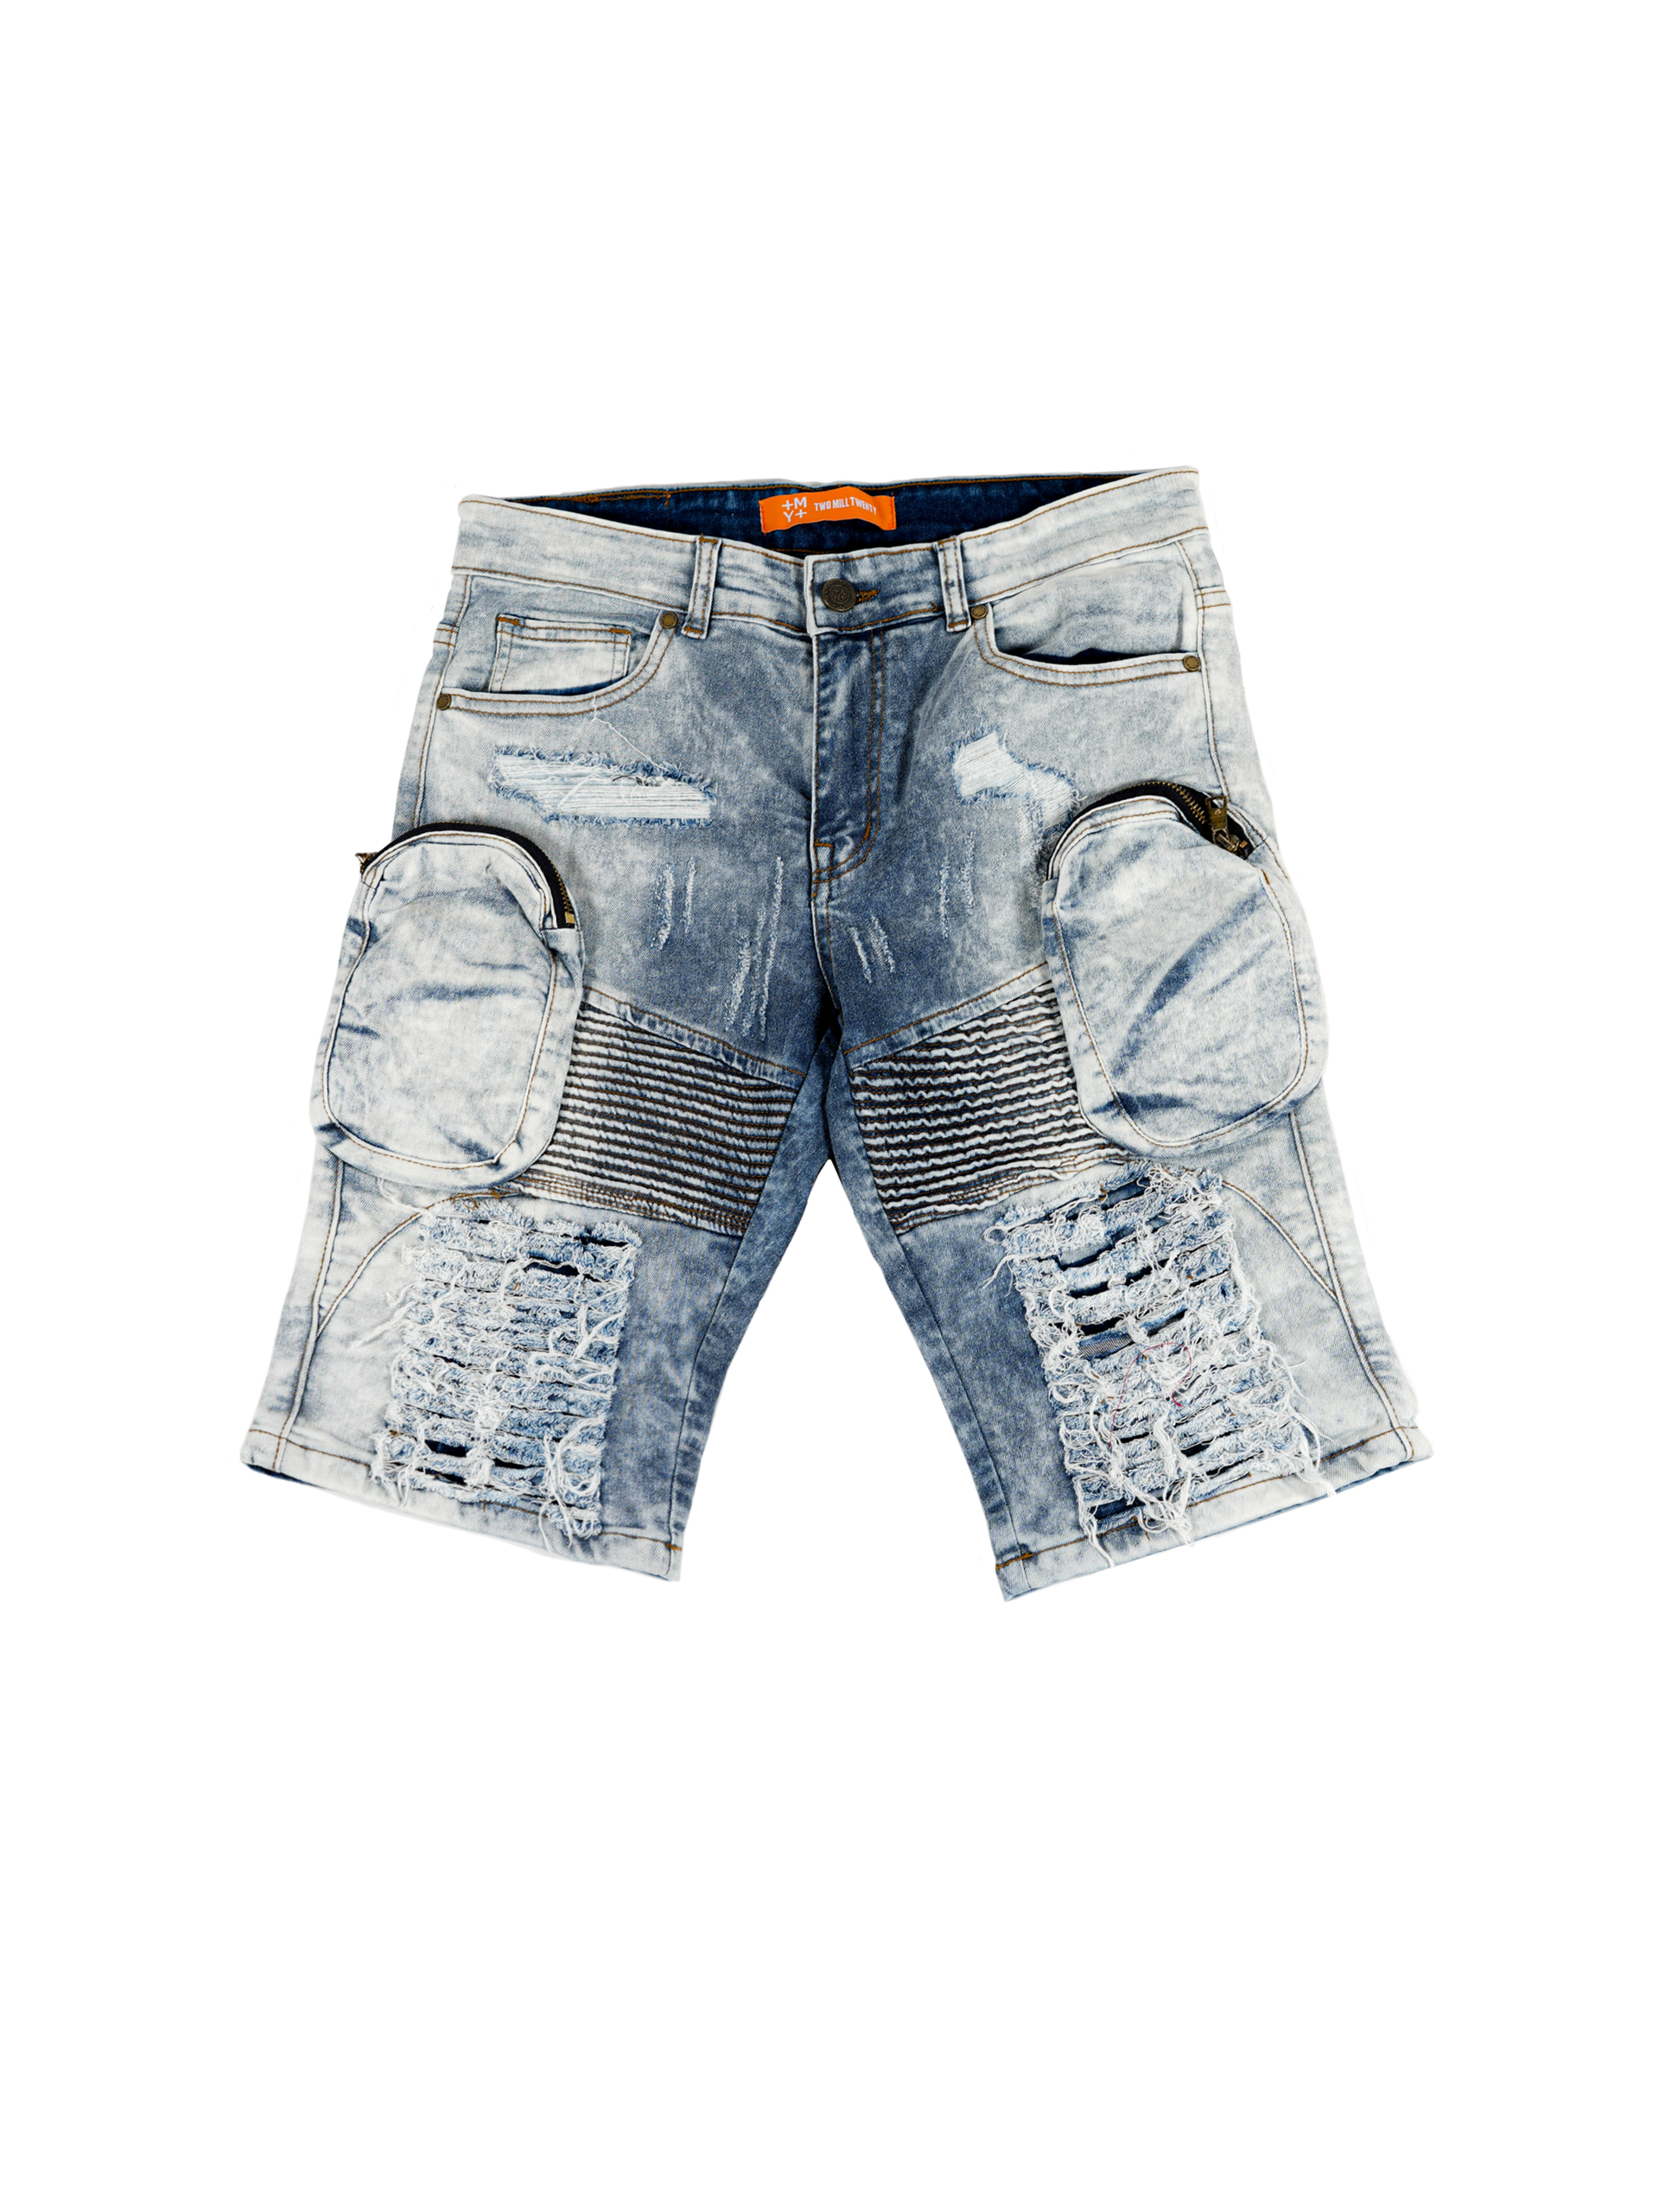 MONROE | Men's Slim Fit Frayed Cutoff Destroyed Ripped Distressed Knee Length Denim Jean Shorts with Cargo Pockets in Blue Acid Wash